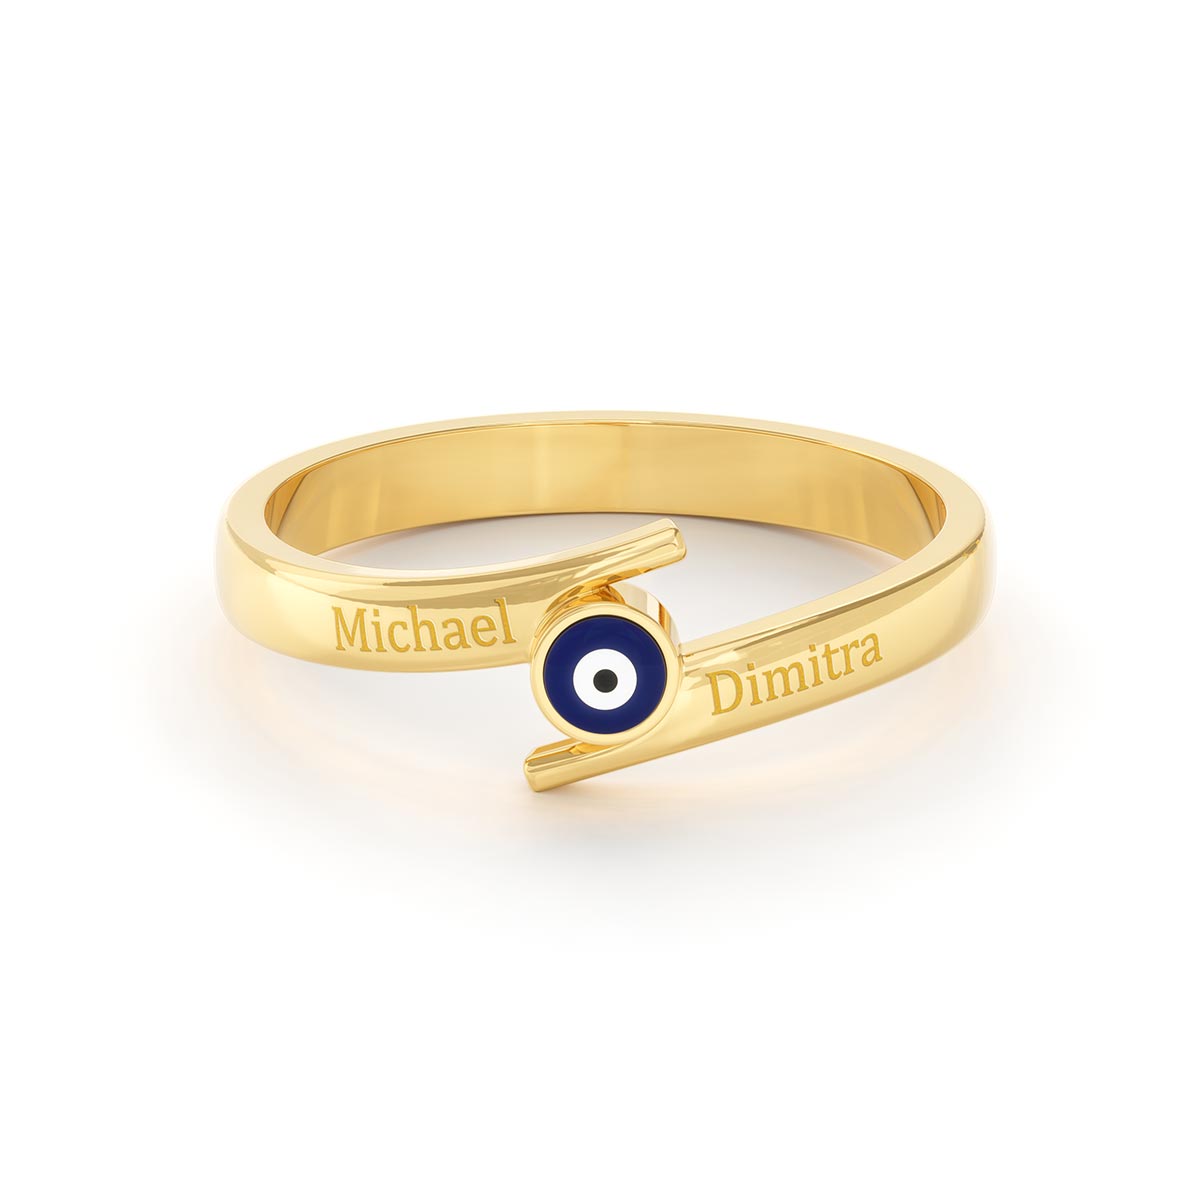 Evil Eye Bypass Ring with Personalized Engravings